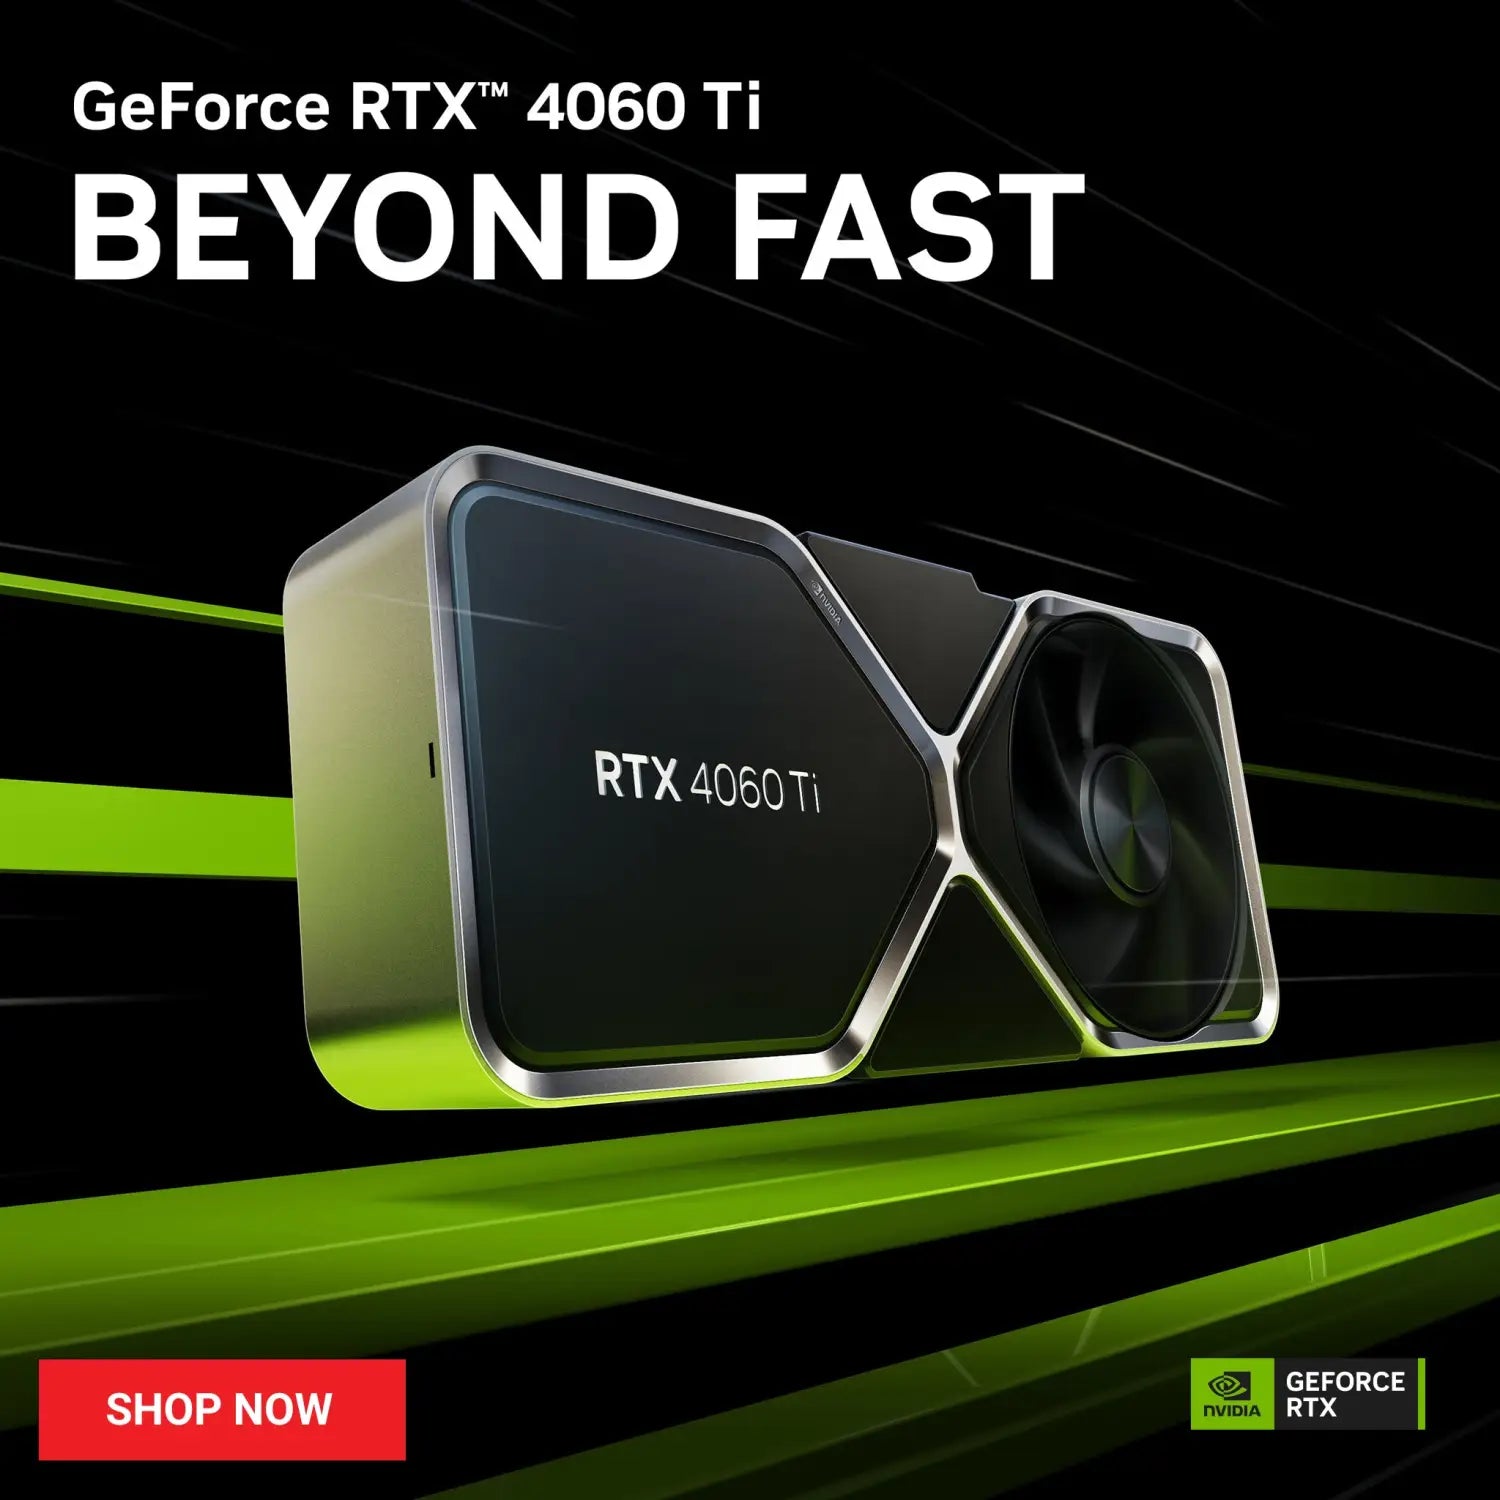 The Nvidia GeForce RTX 4060 Ti is here!